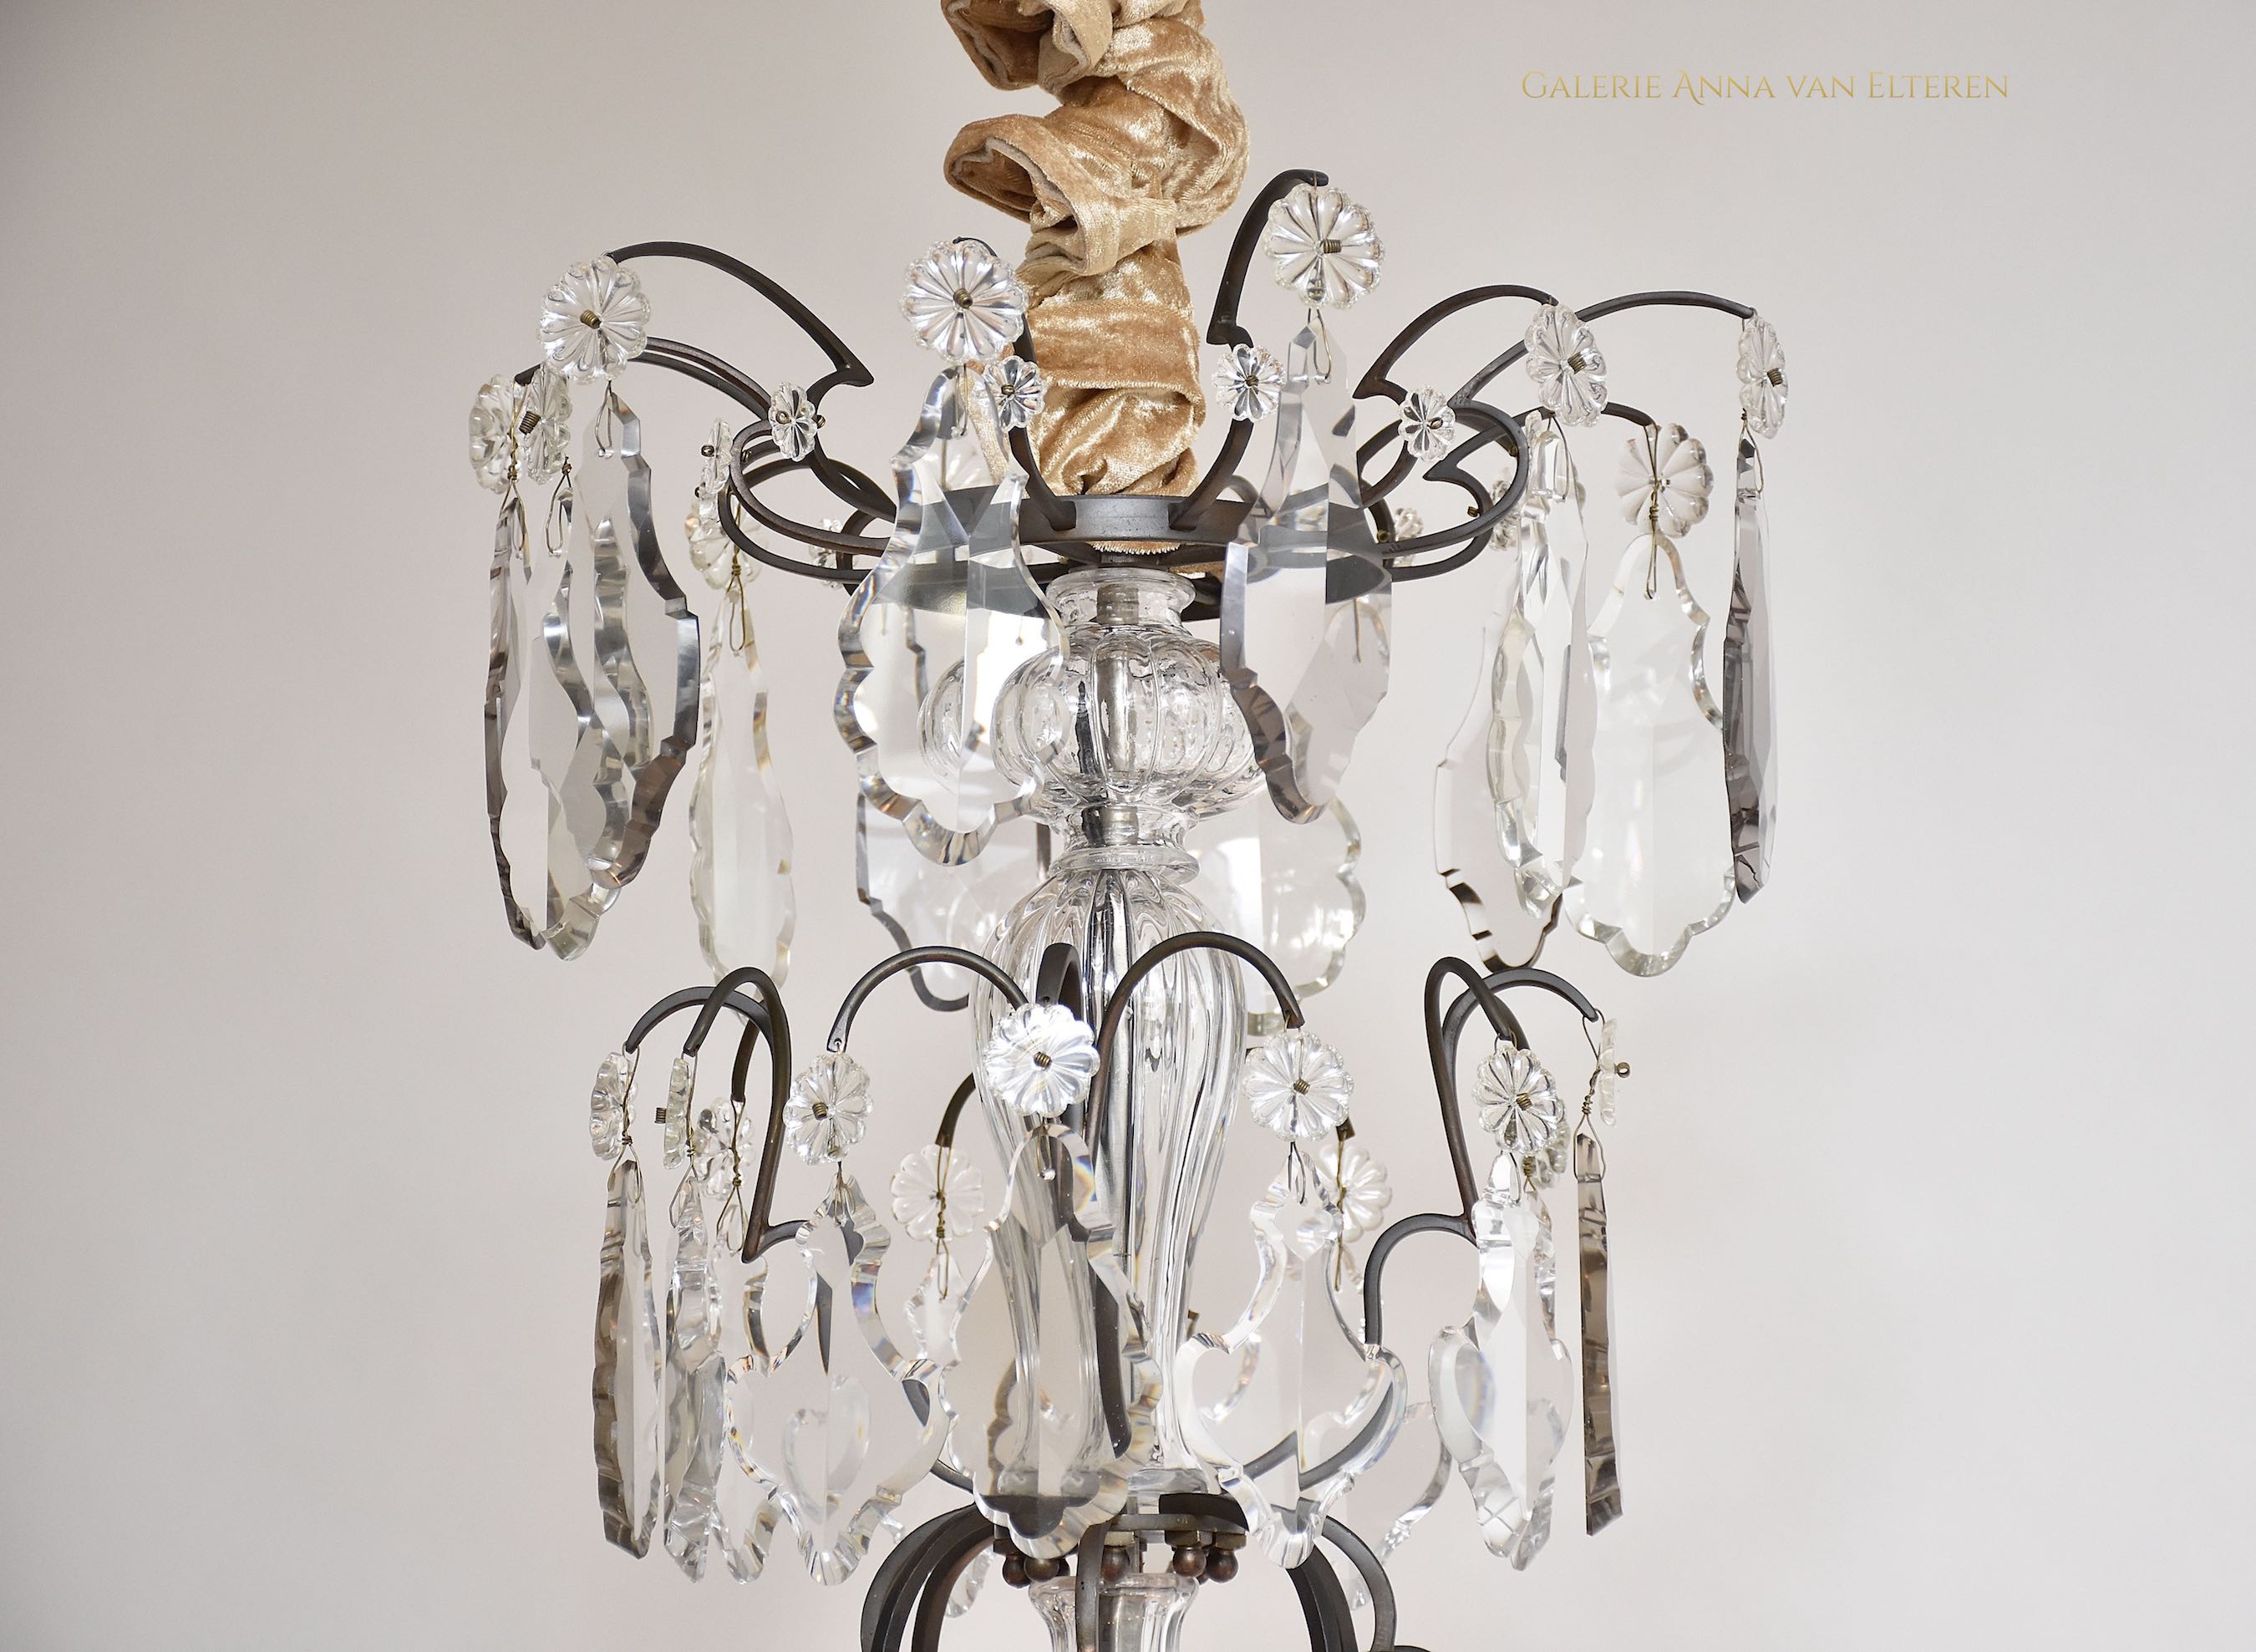 Large antique French chandelier in the style of Louis XV